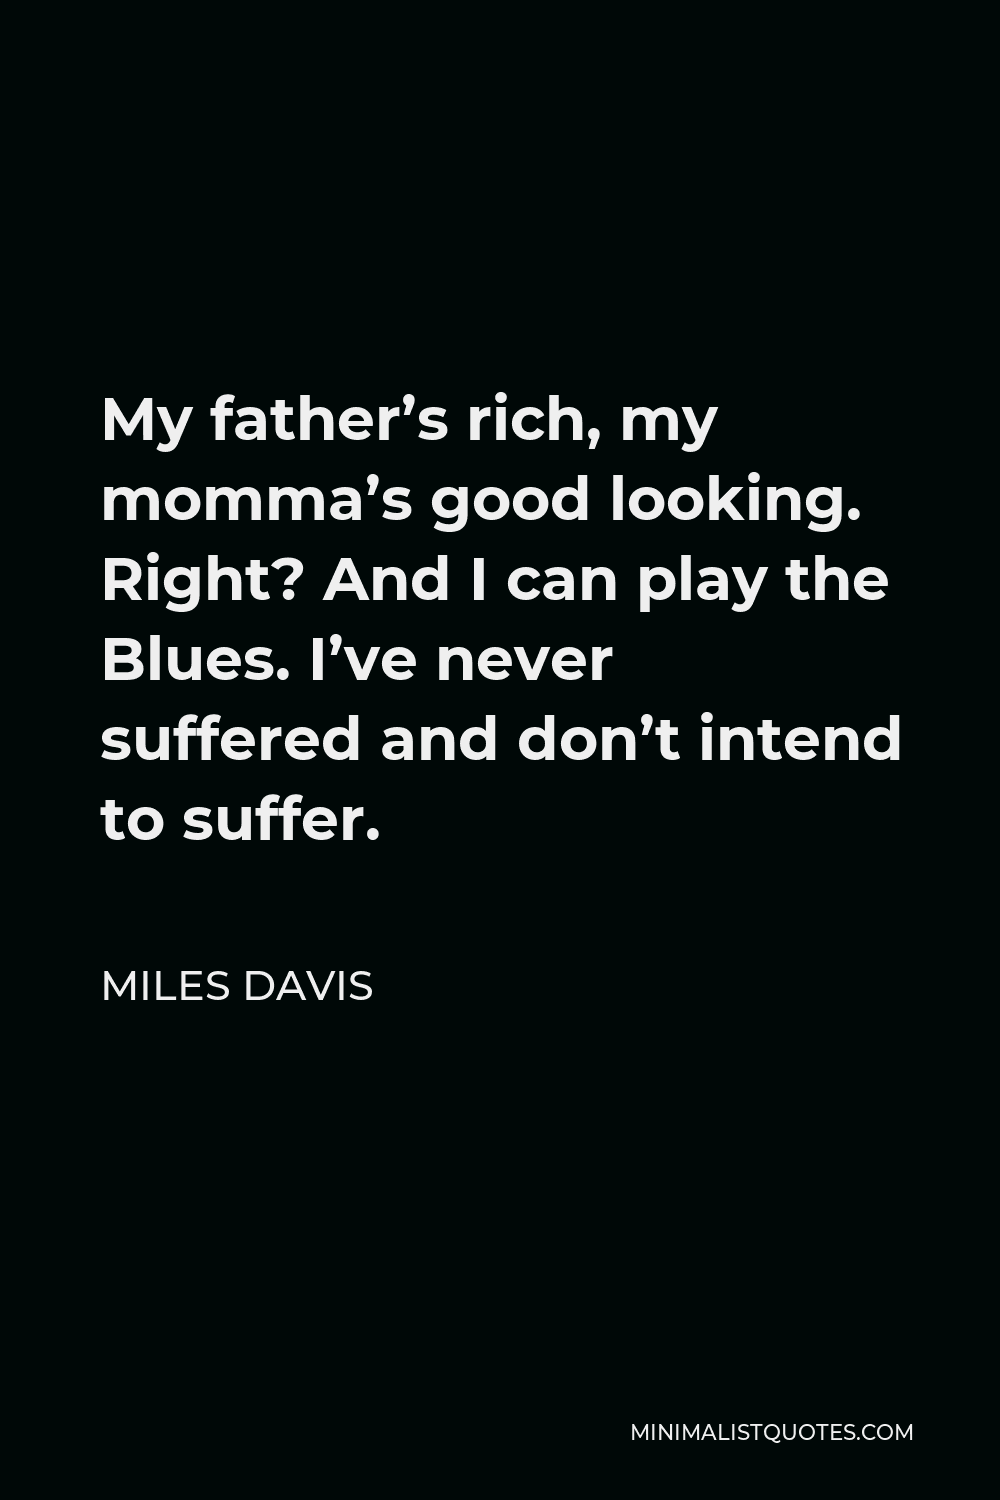 Miles Davis Quote - My father’s rich, my momma’s good looking. Right? And I can play the Blues. I’ve never suffered and don’t intend to suffer.